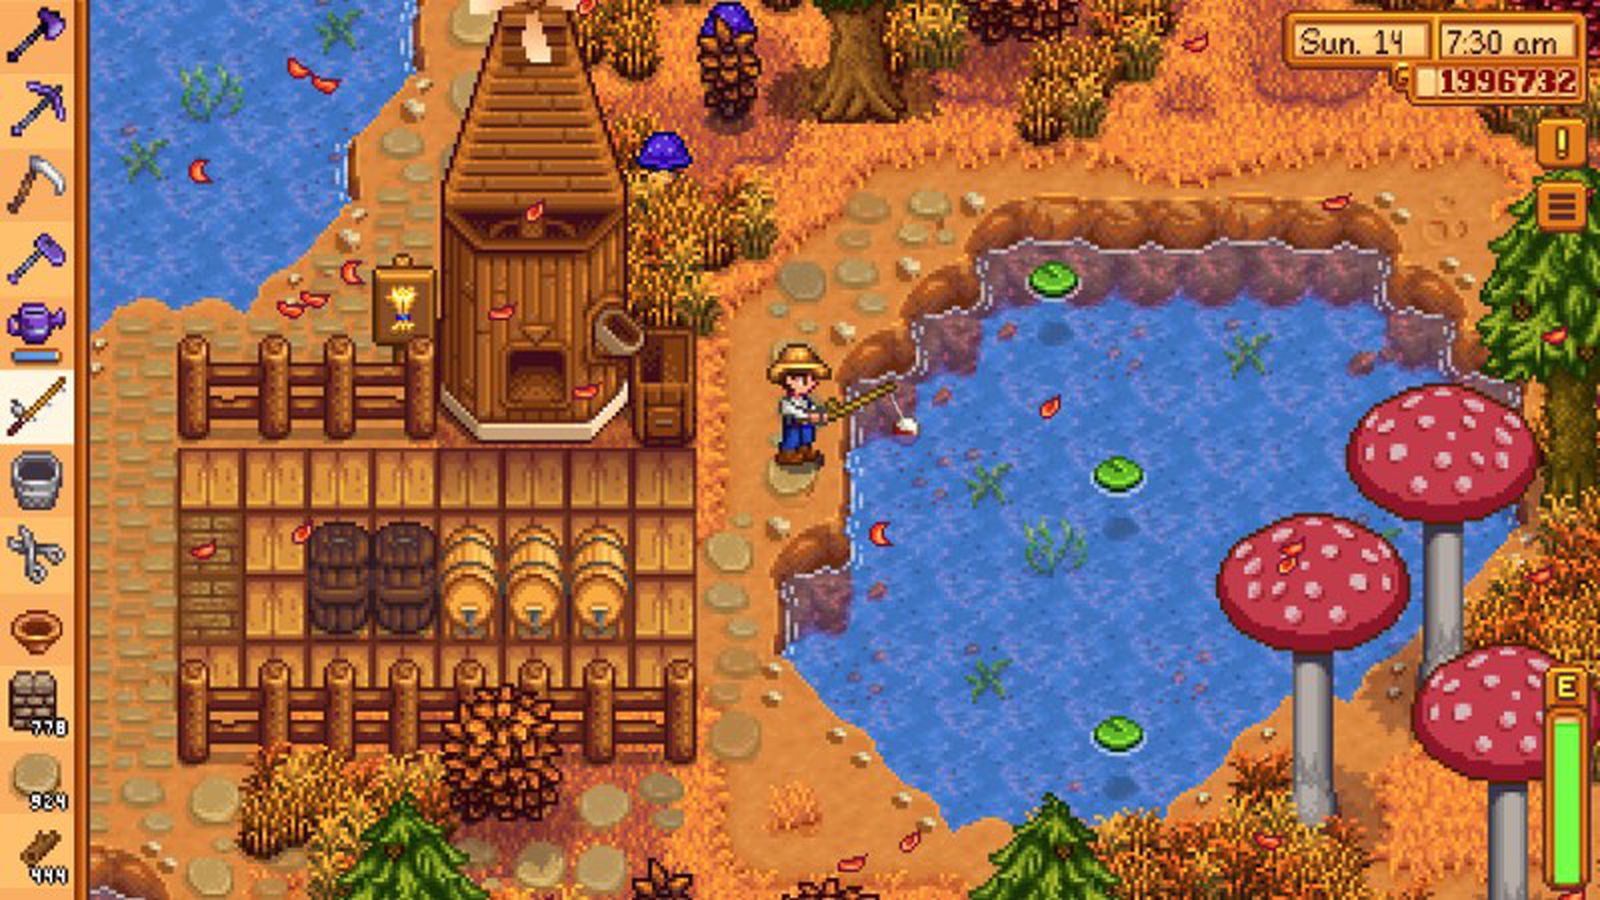 Stardew Valley on Mac: How to Play & Benchmarks